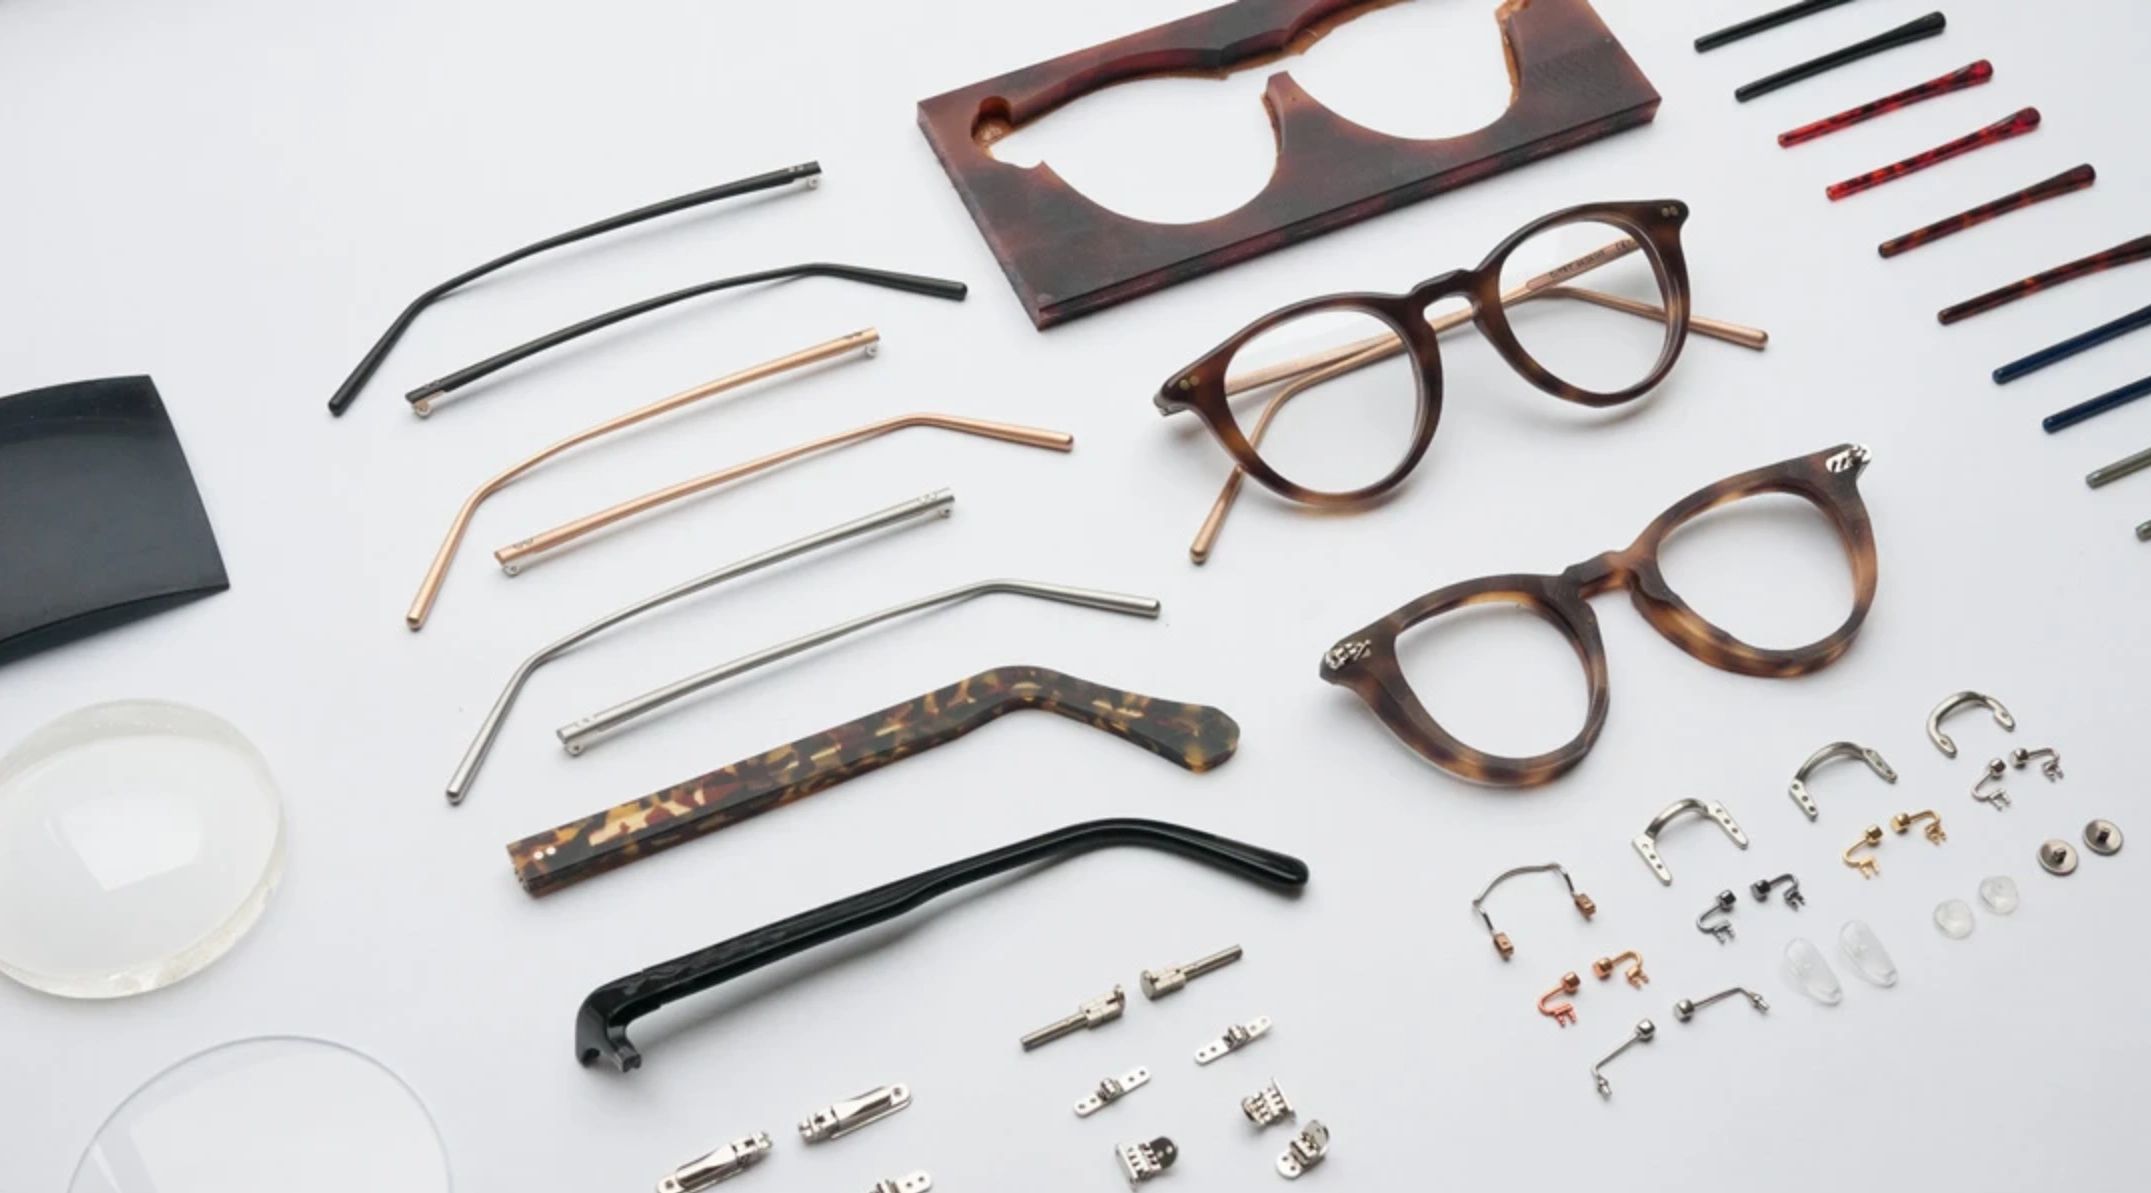 Assortment of eyeglass frame parts placed on a white background.